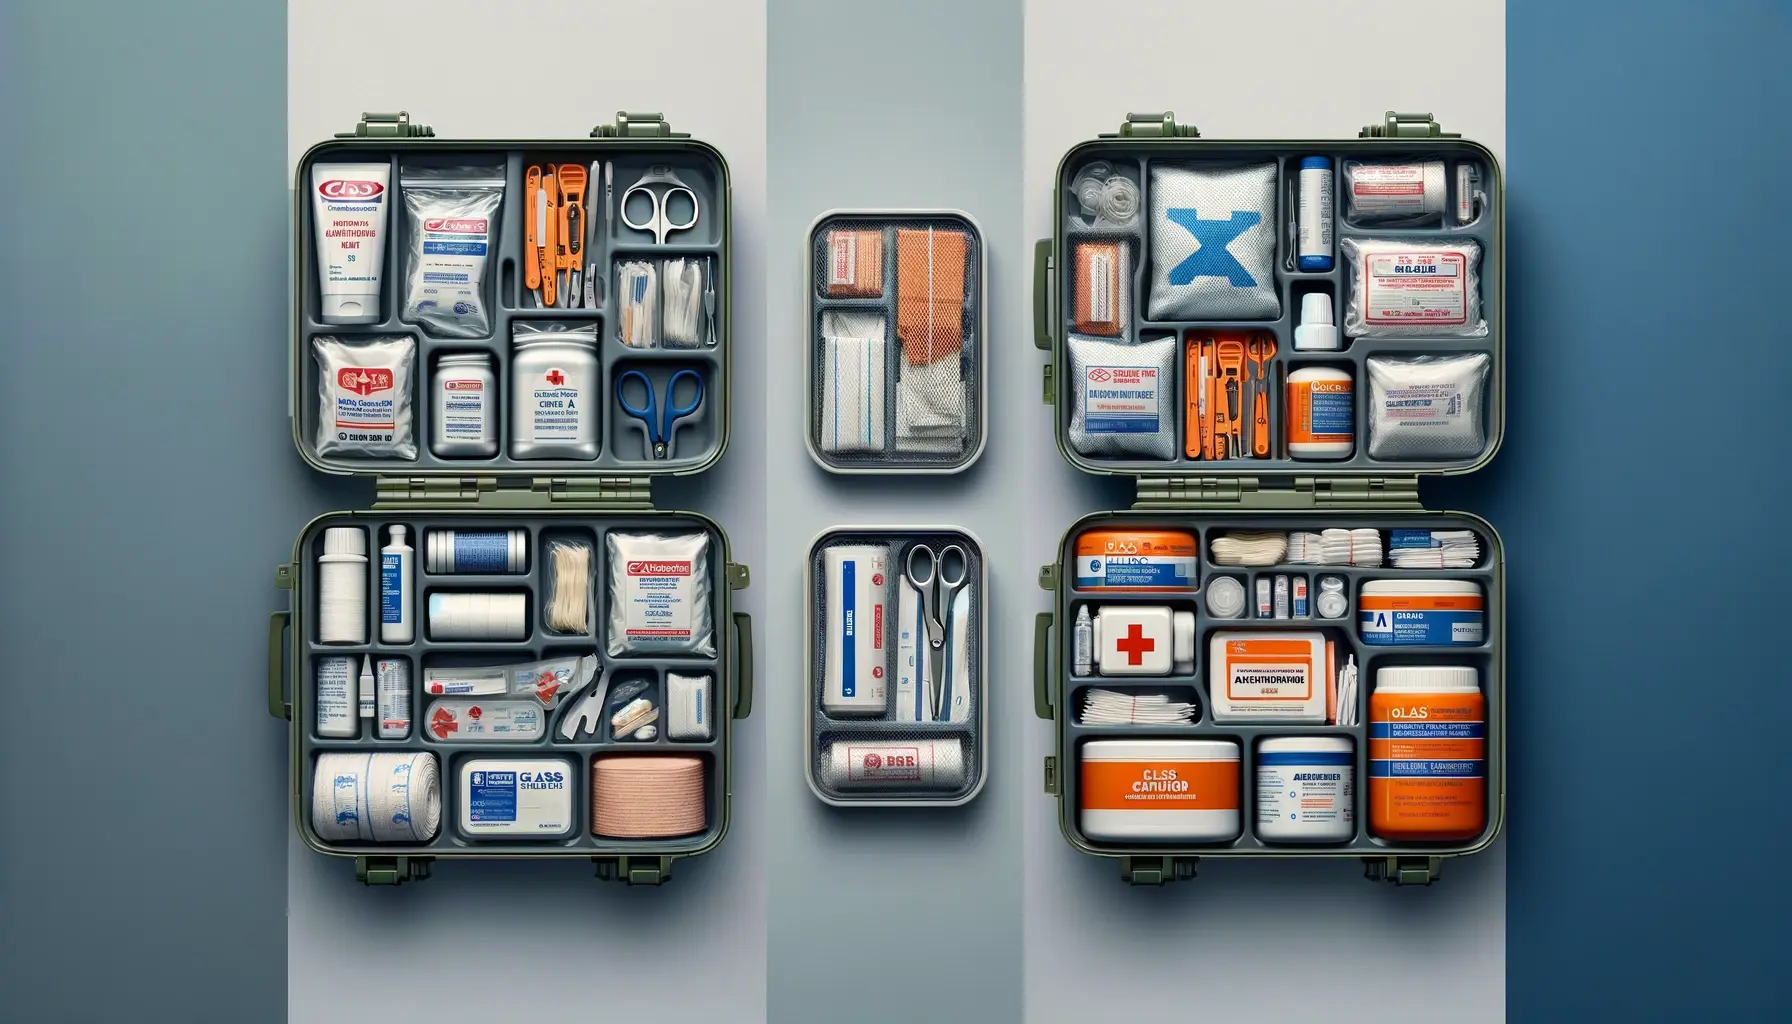 How many classes of first aid kits are there? Class A vs Class B first aid kits